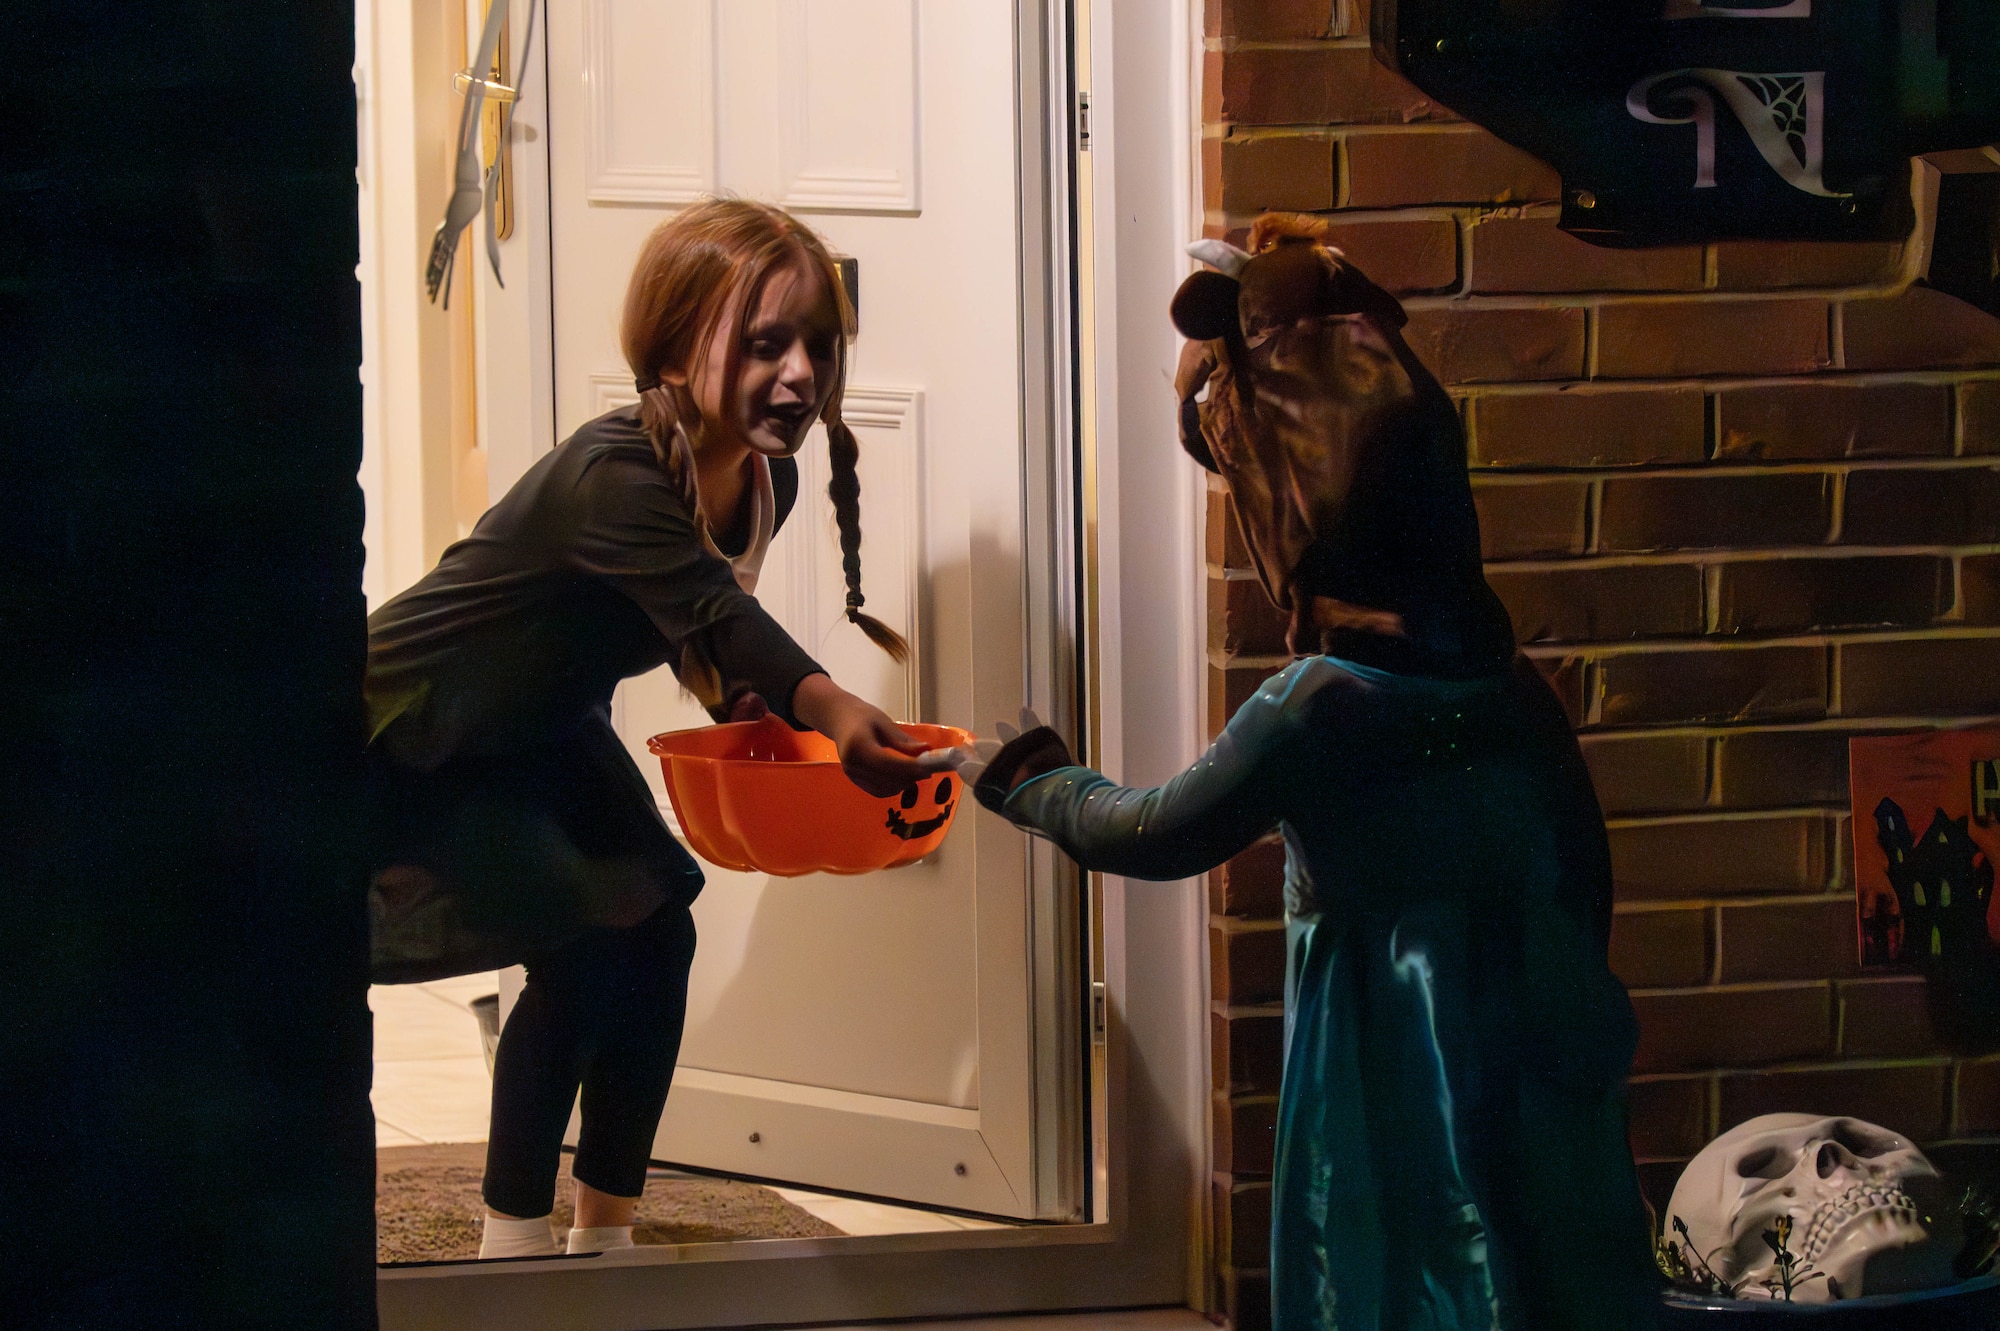 One child hands out candy to another child in a doorway